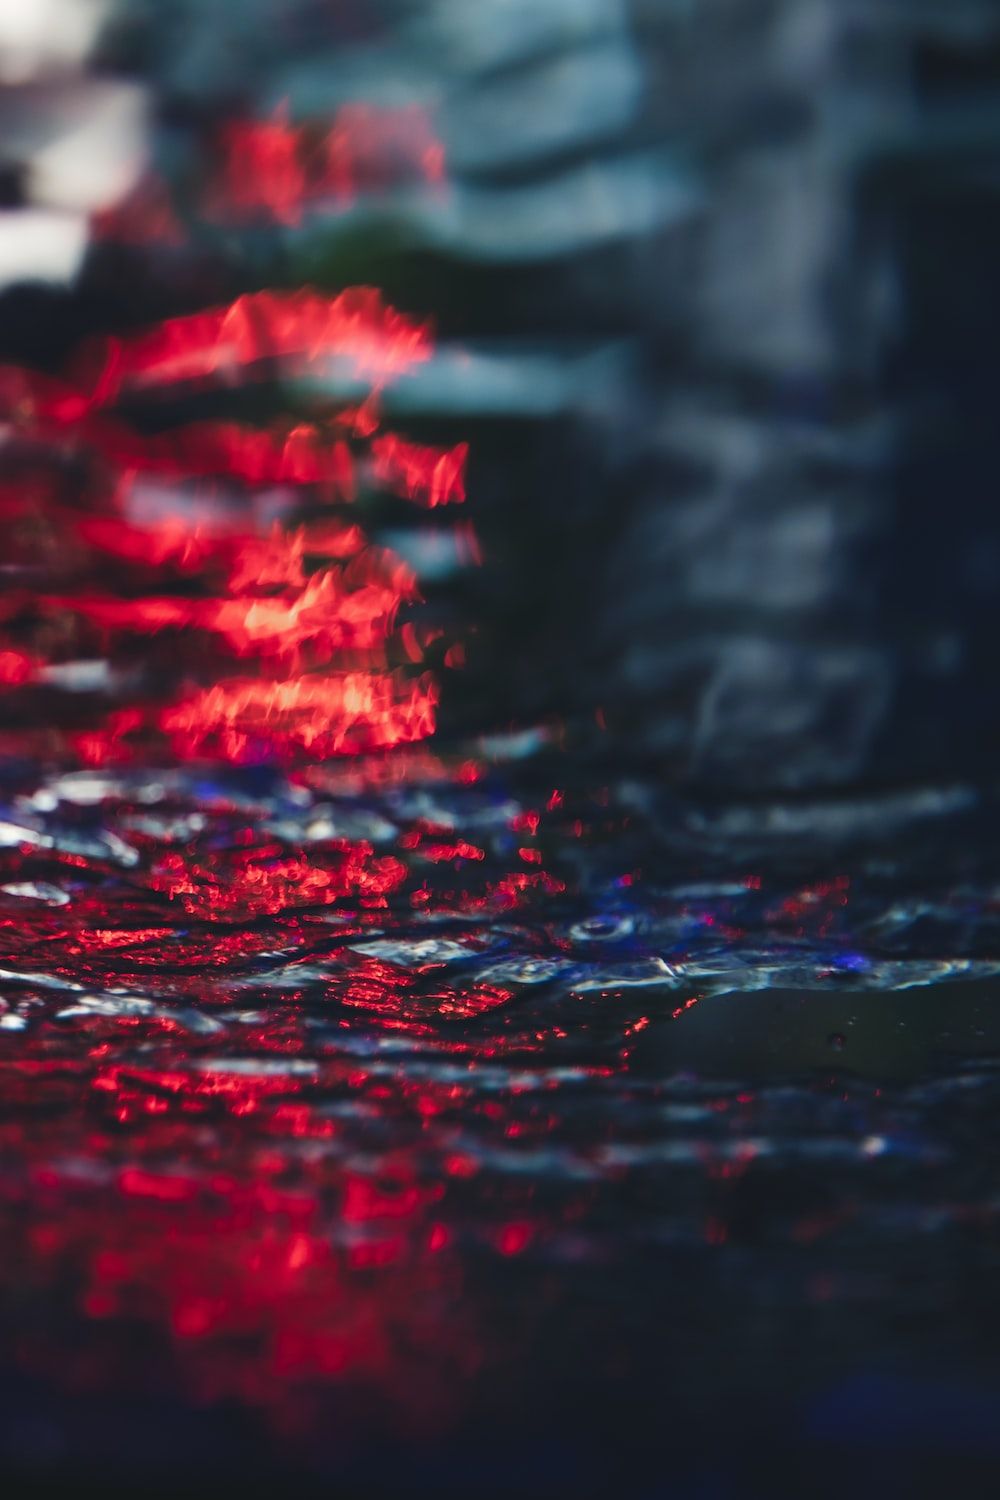 A blurry image of a red and blue umbrella photo